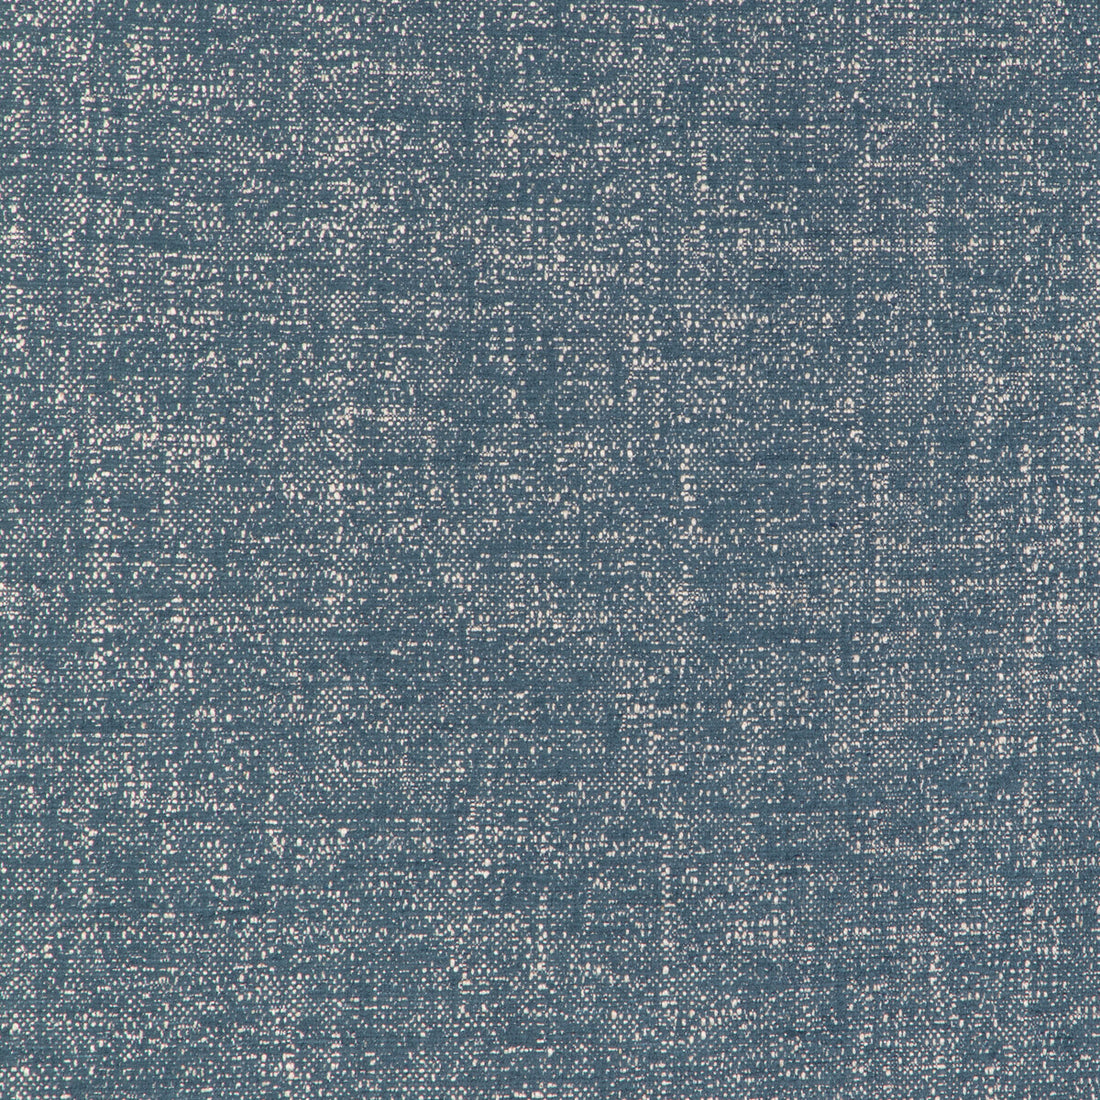 Kravet Design fabric in 36951-515 color - pattern 36951.515.0 - by Kravet Design in the Sustainable Textures II collection